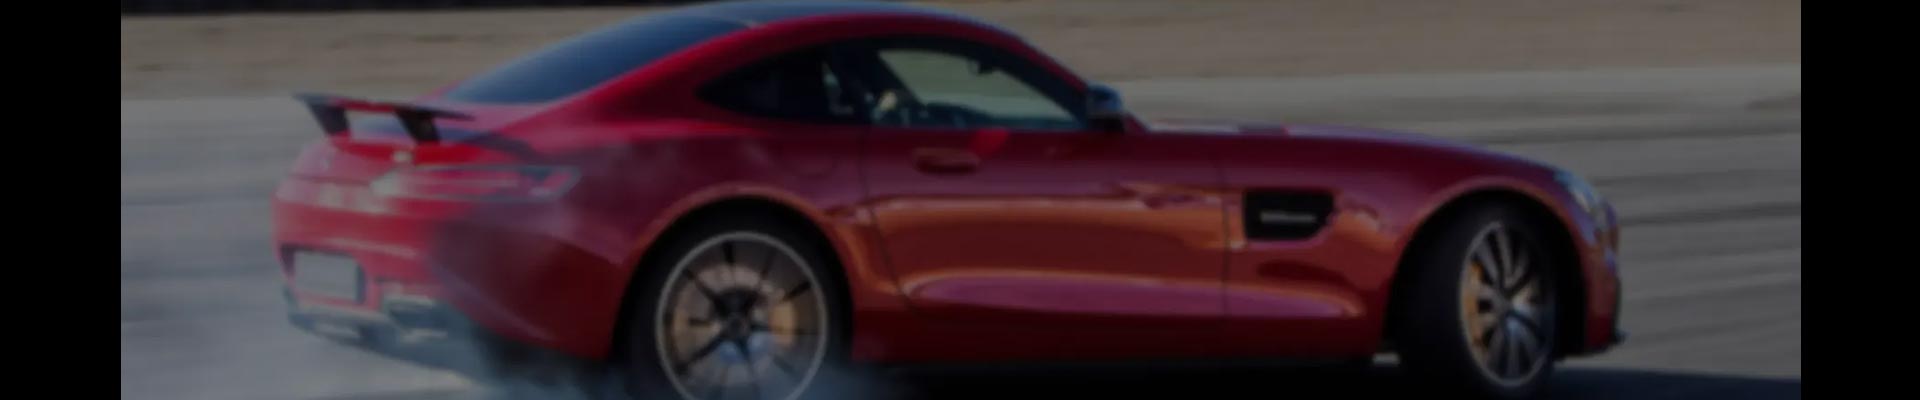 Shop Replacement SRT Viper Parts with Discounted Price on the Net